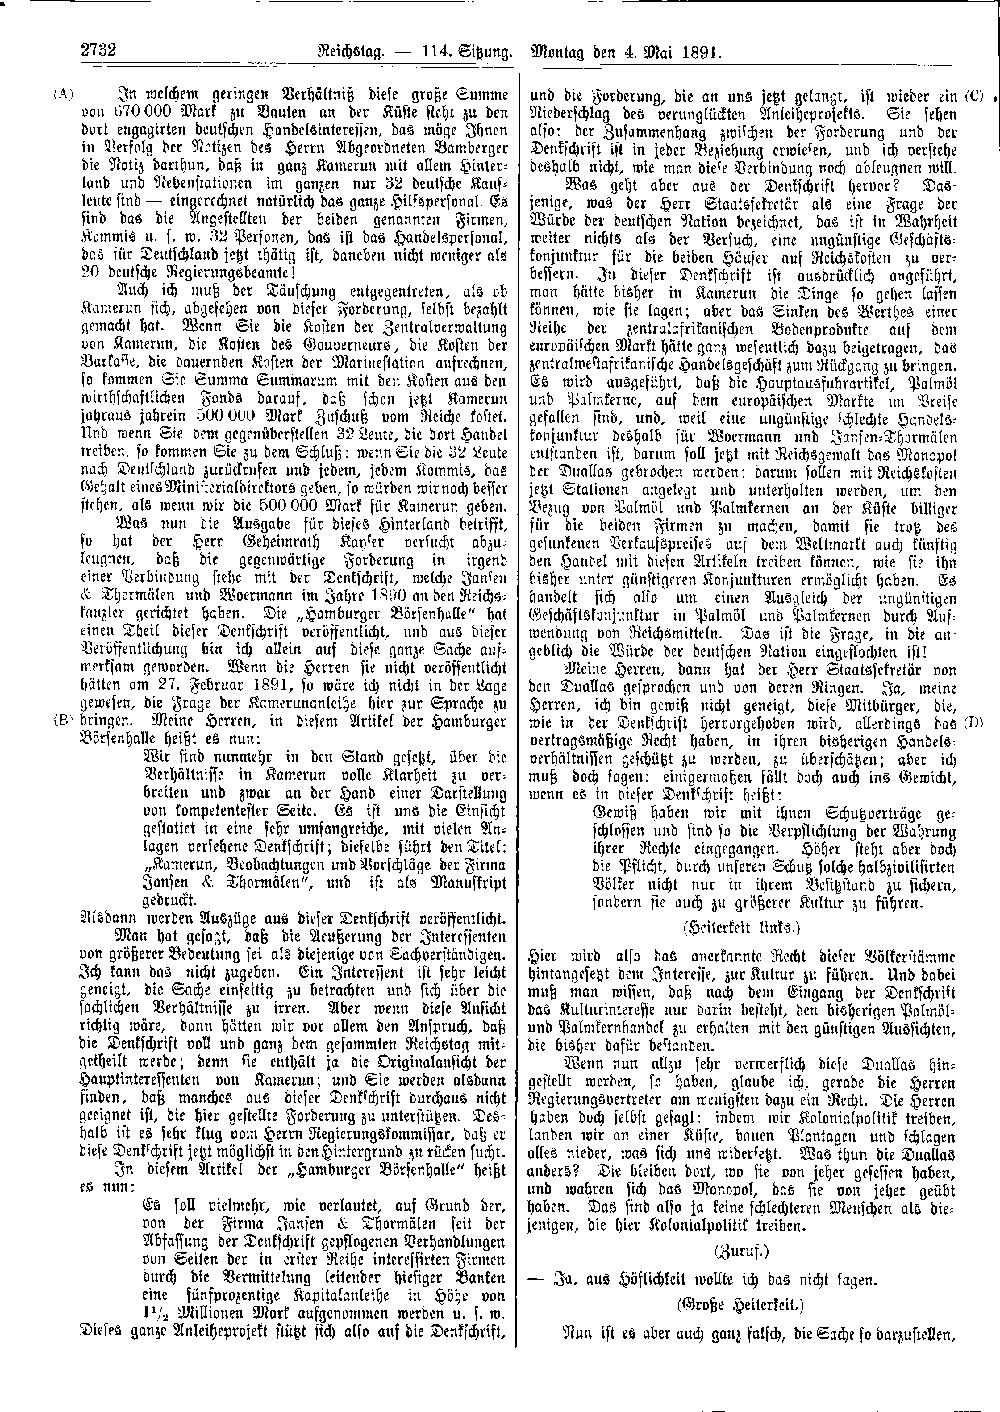 Scan of page 2732